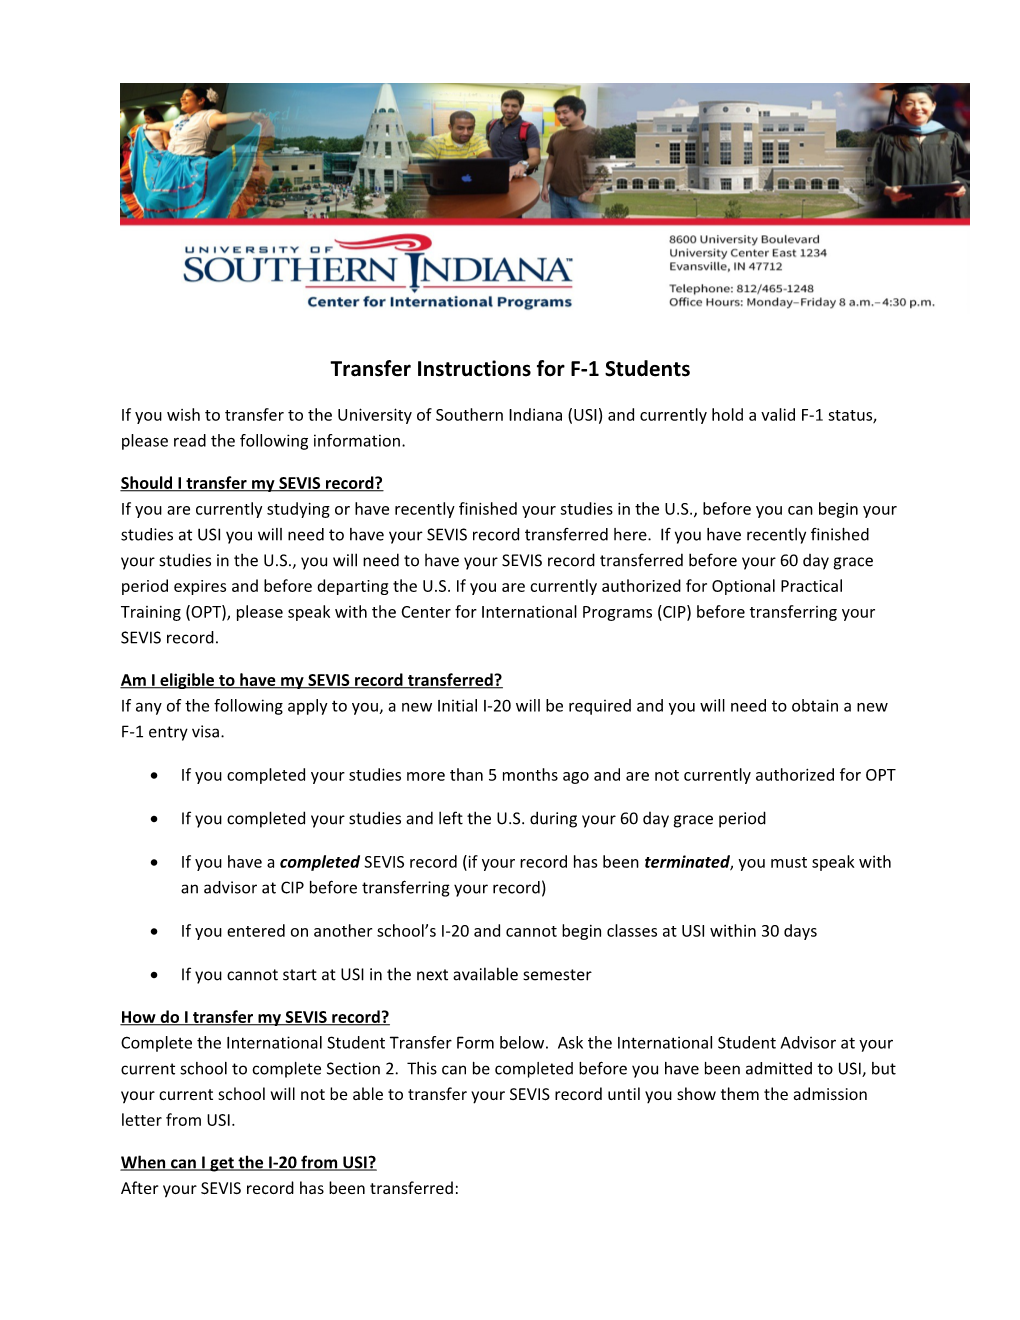 Transfer Instructions for F-1 Students